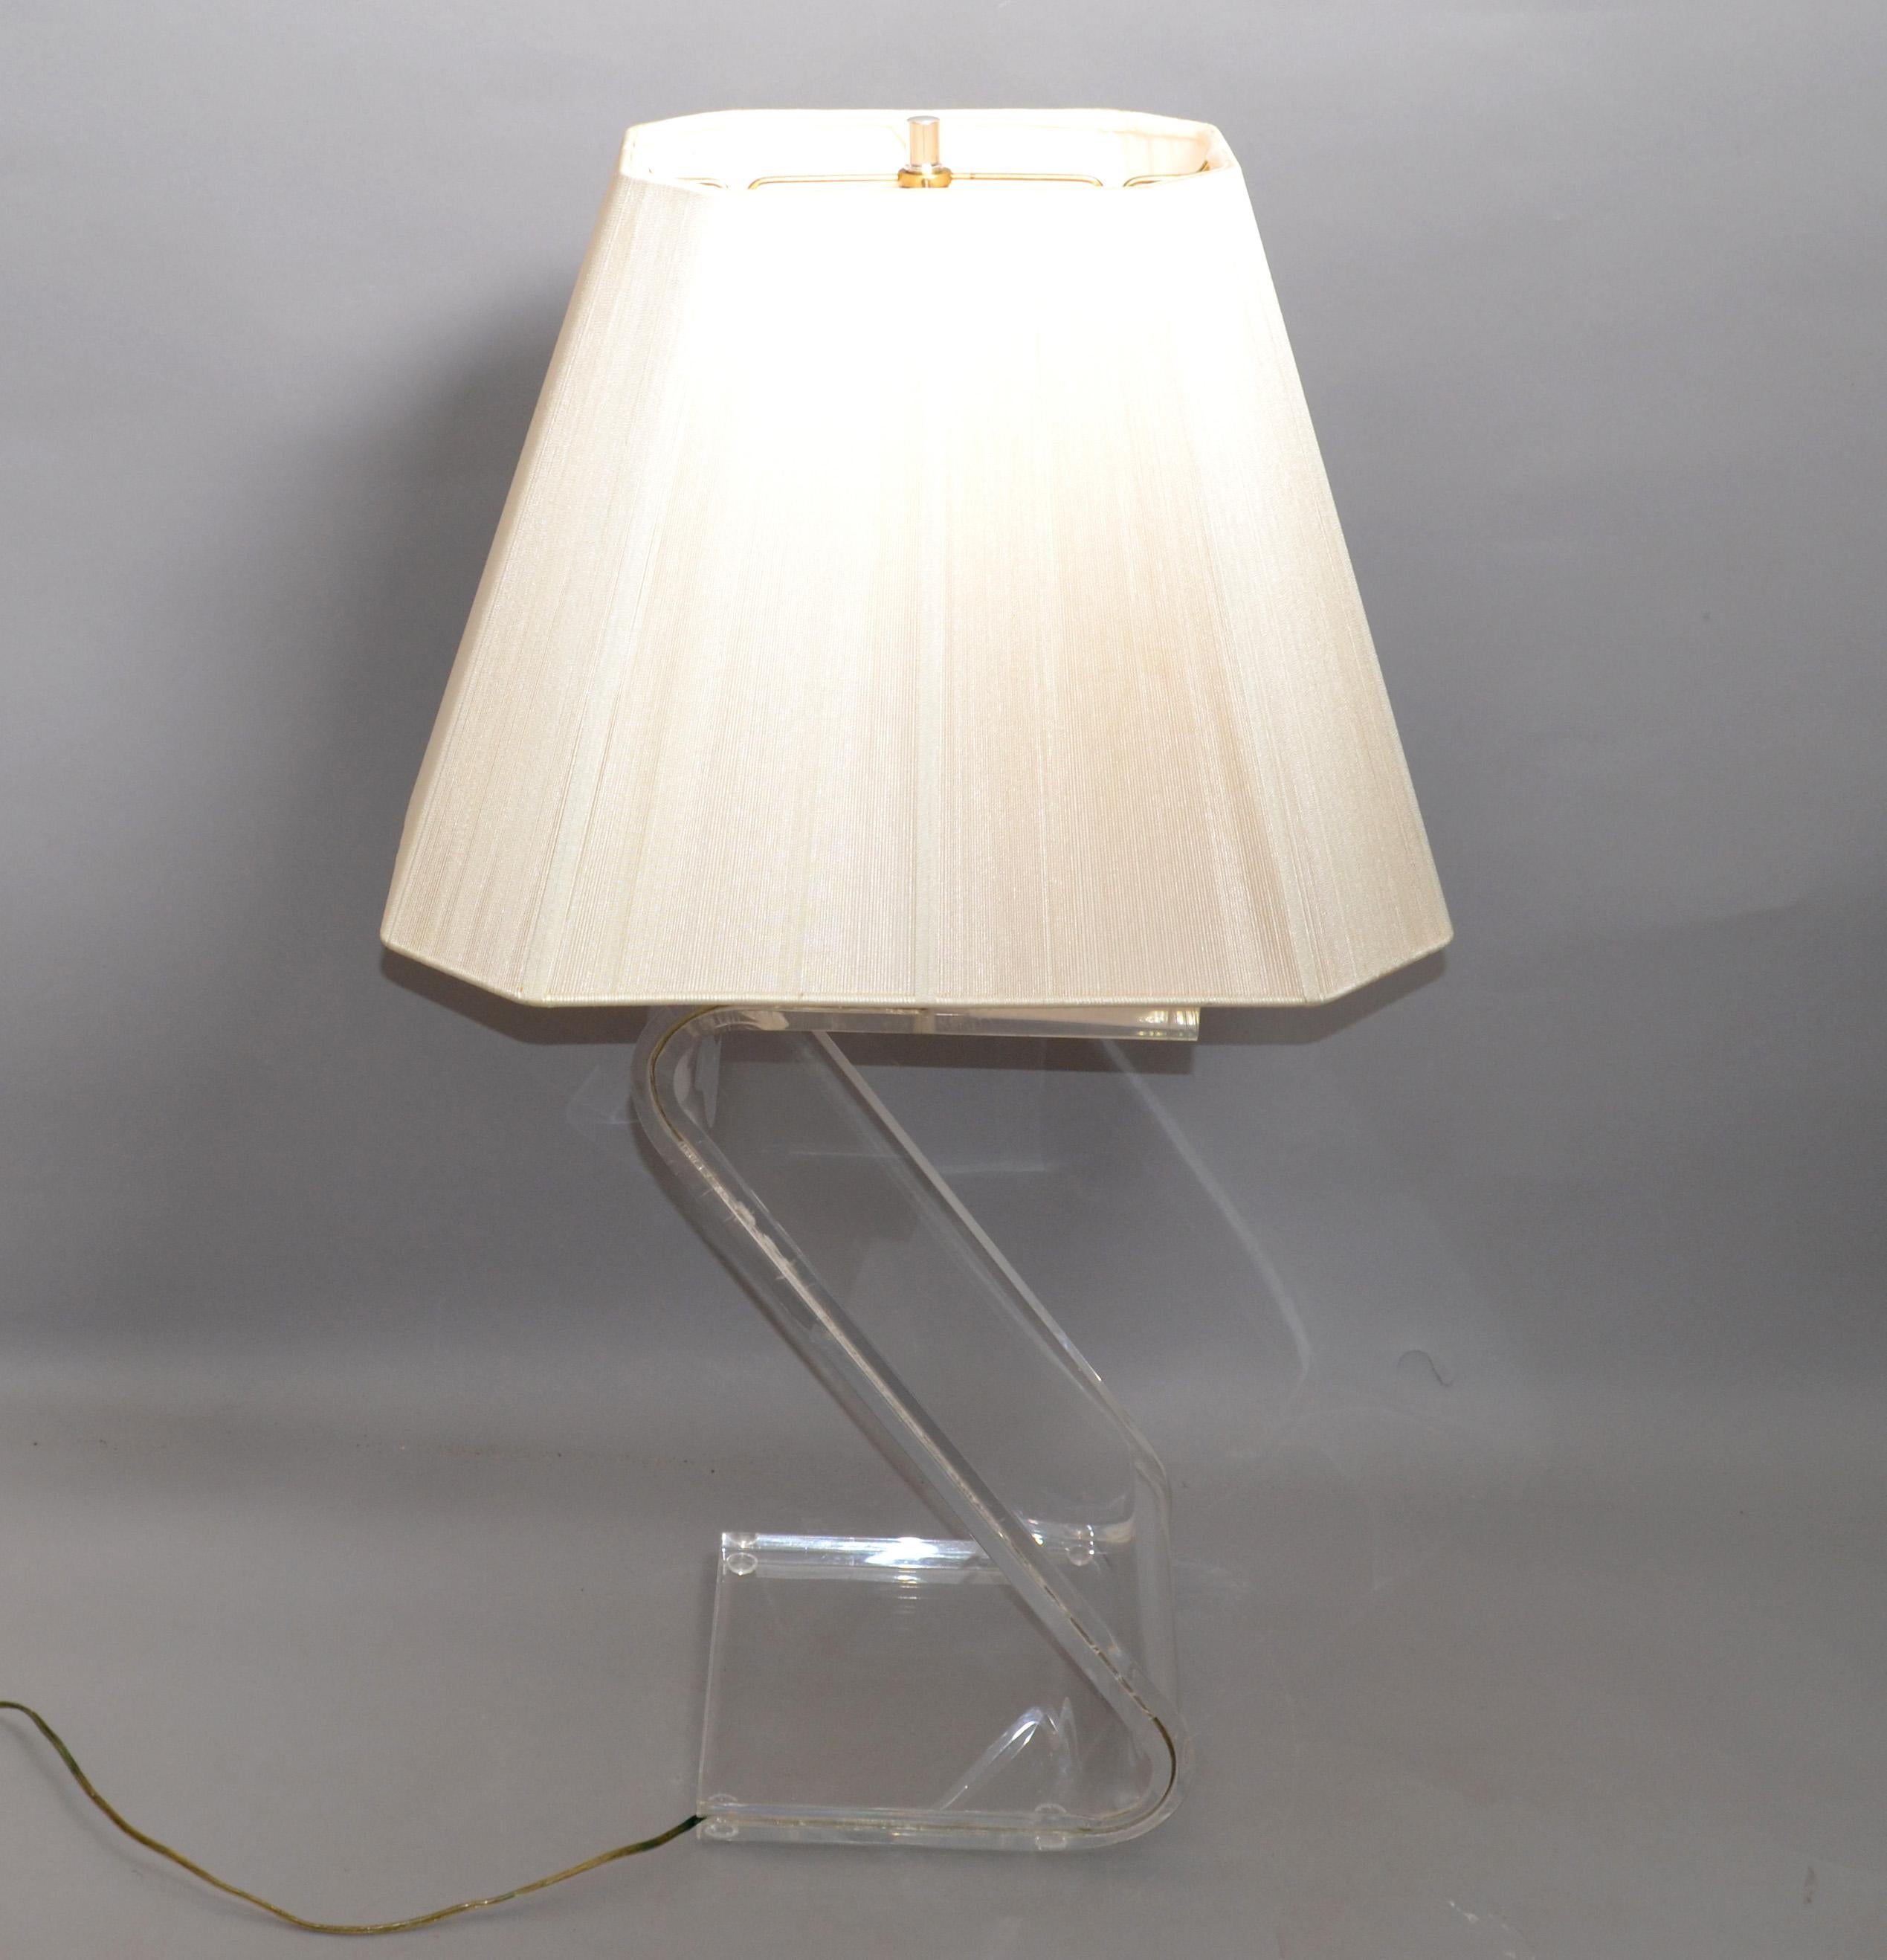 Stunning bent 1-inch-thick Lucite floor lamp in Z Shape with Chrome Hardware and a Beige Color Fabric Plissé Shade.
US Wiring and it takes one regular or LED Light bulb.
In pristine vintage condition with some age-related crazing to the